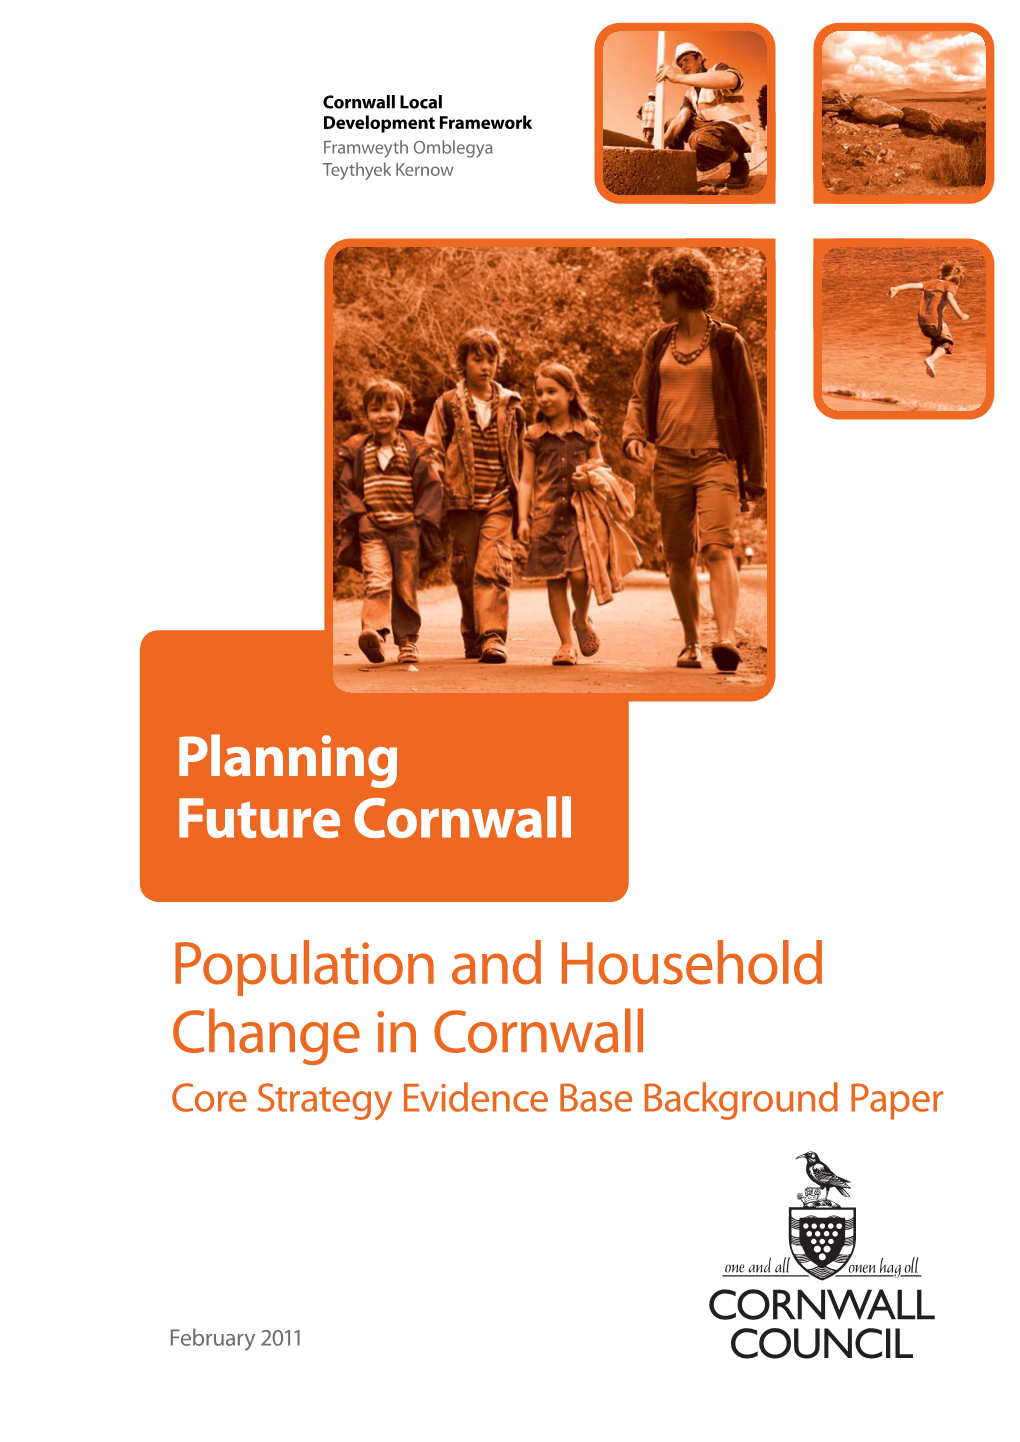 Population and Household Change in Cornwall Core Strategy Evidence Base Background Paper